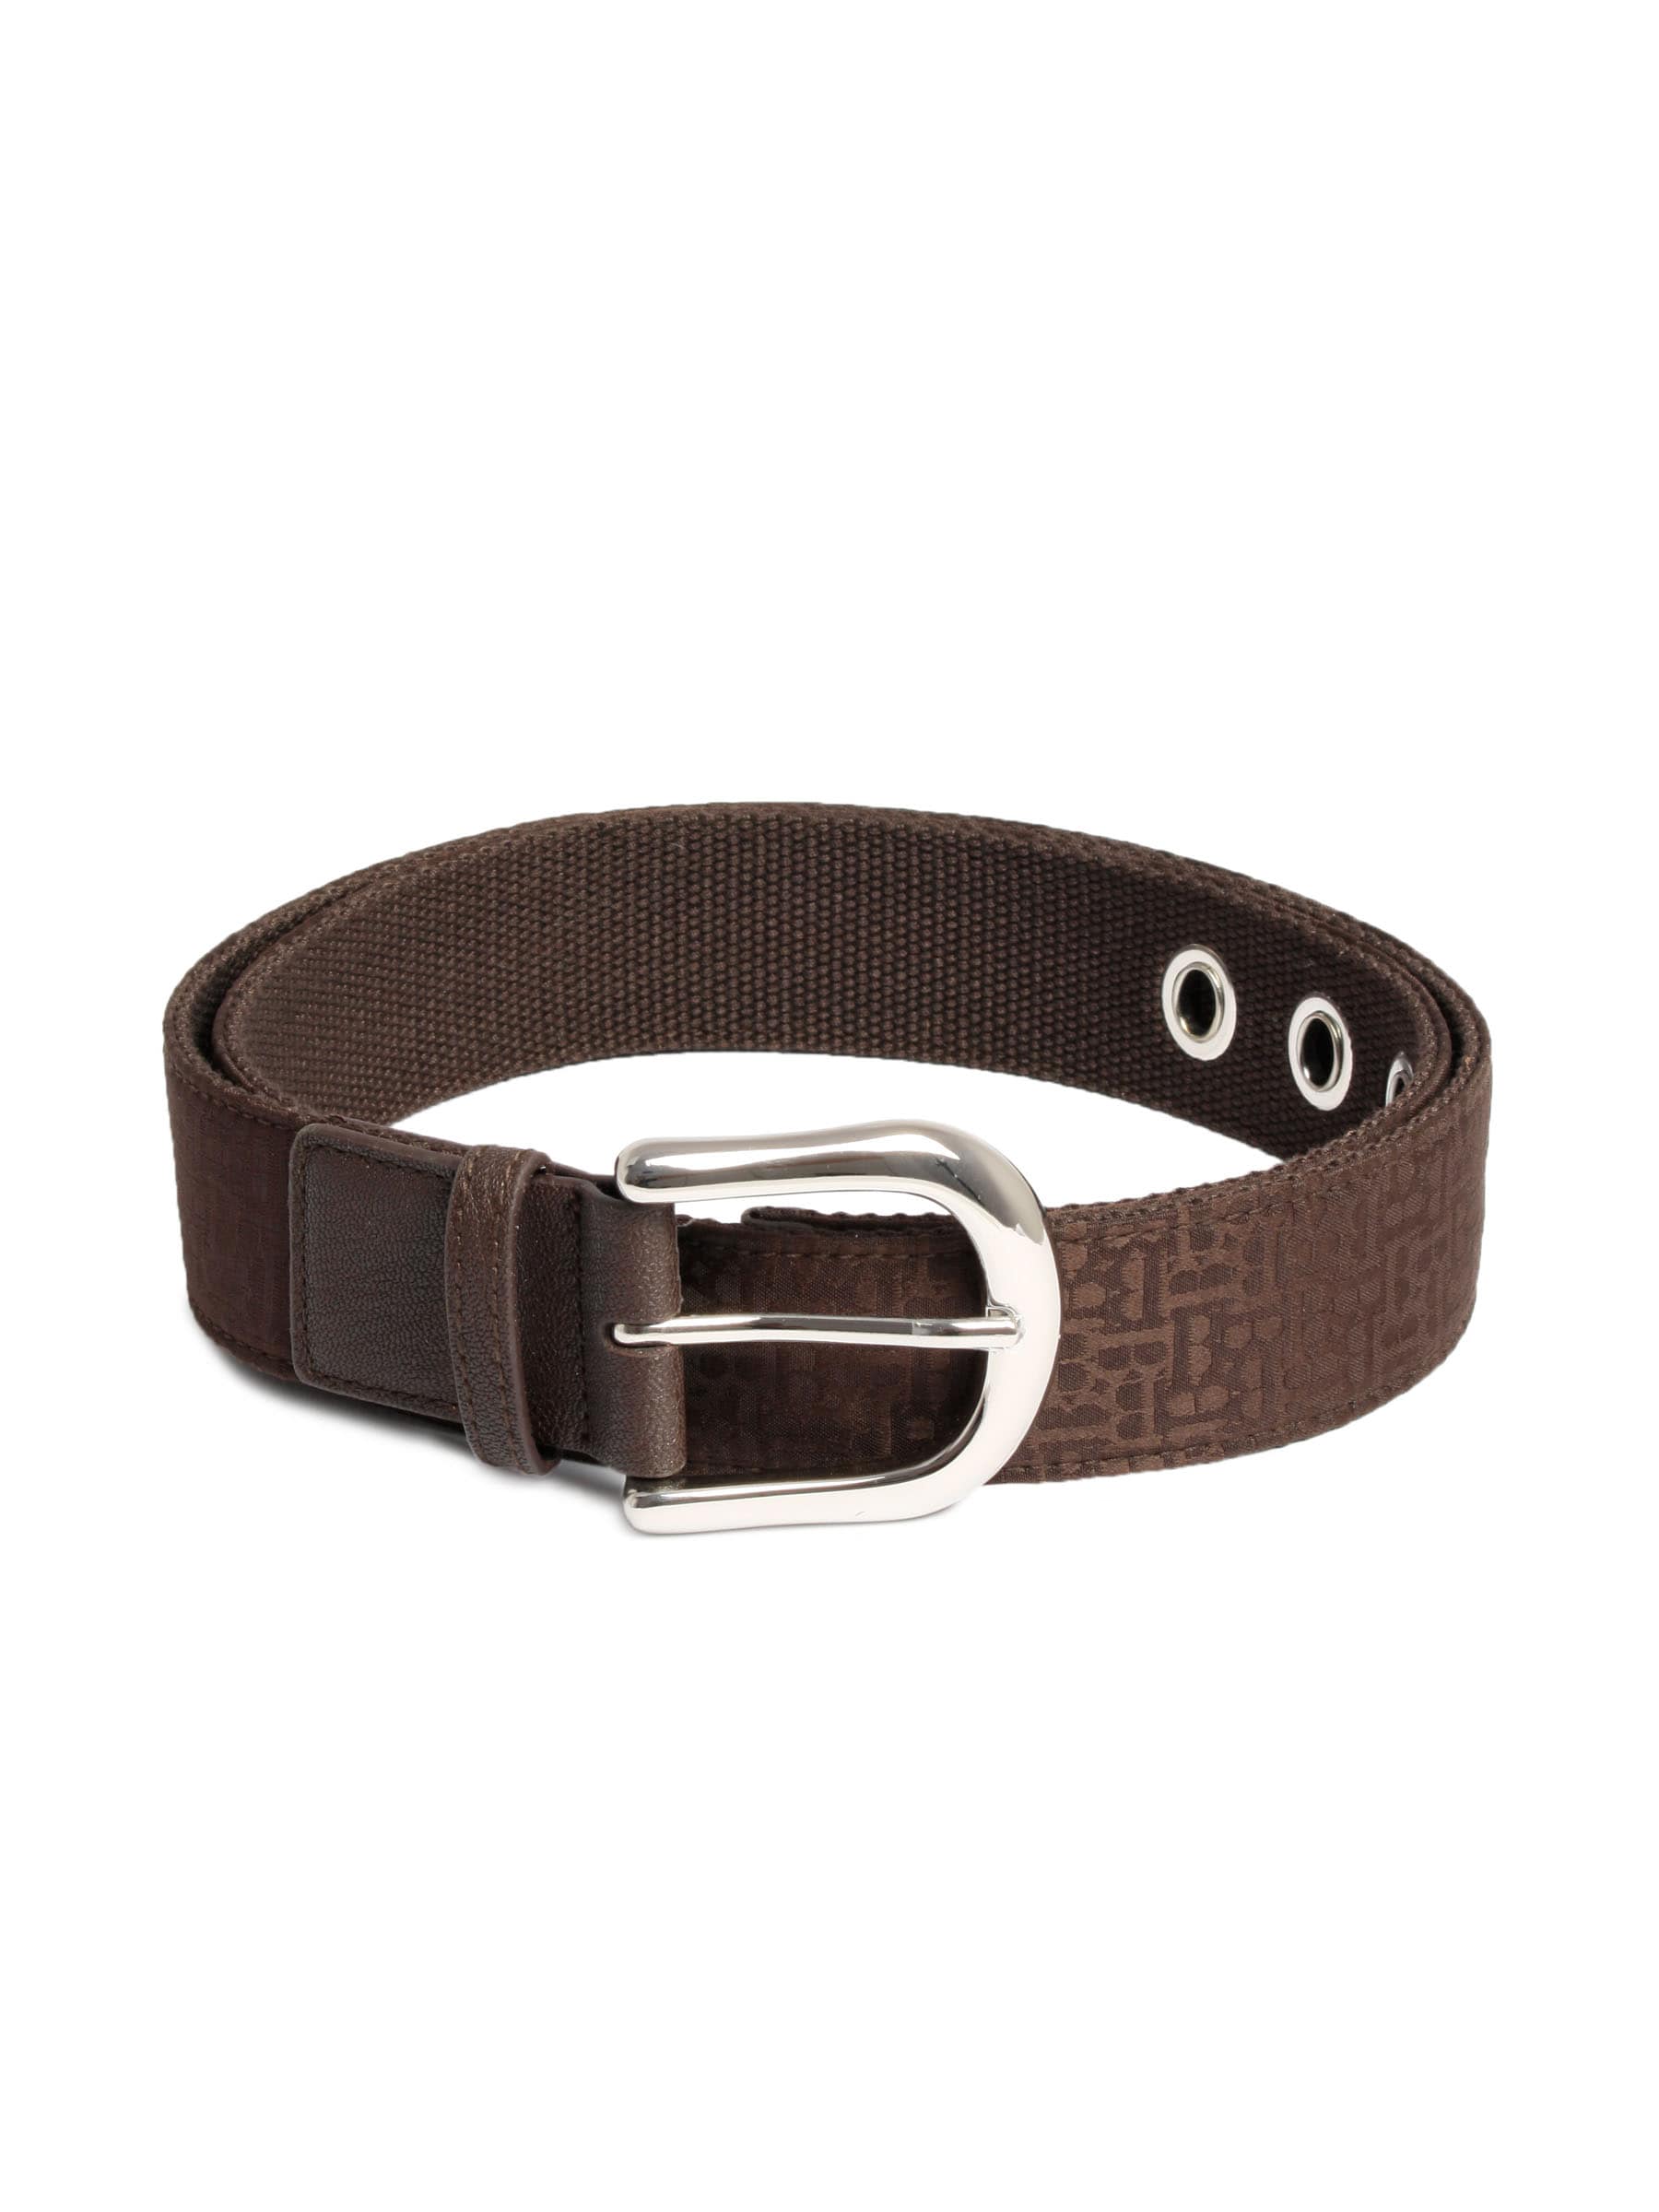 United Colors of Benetton Women Solid Brown Belts